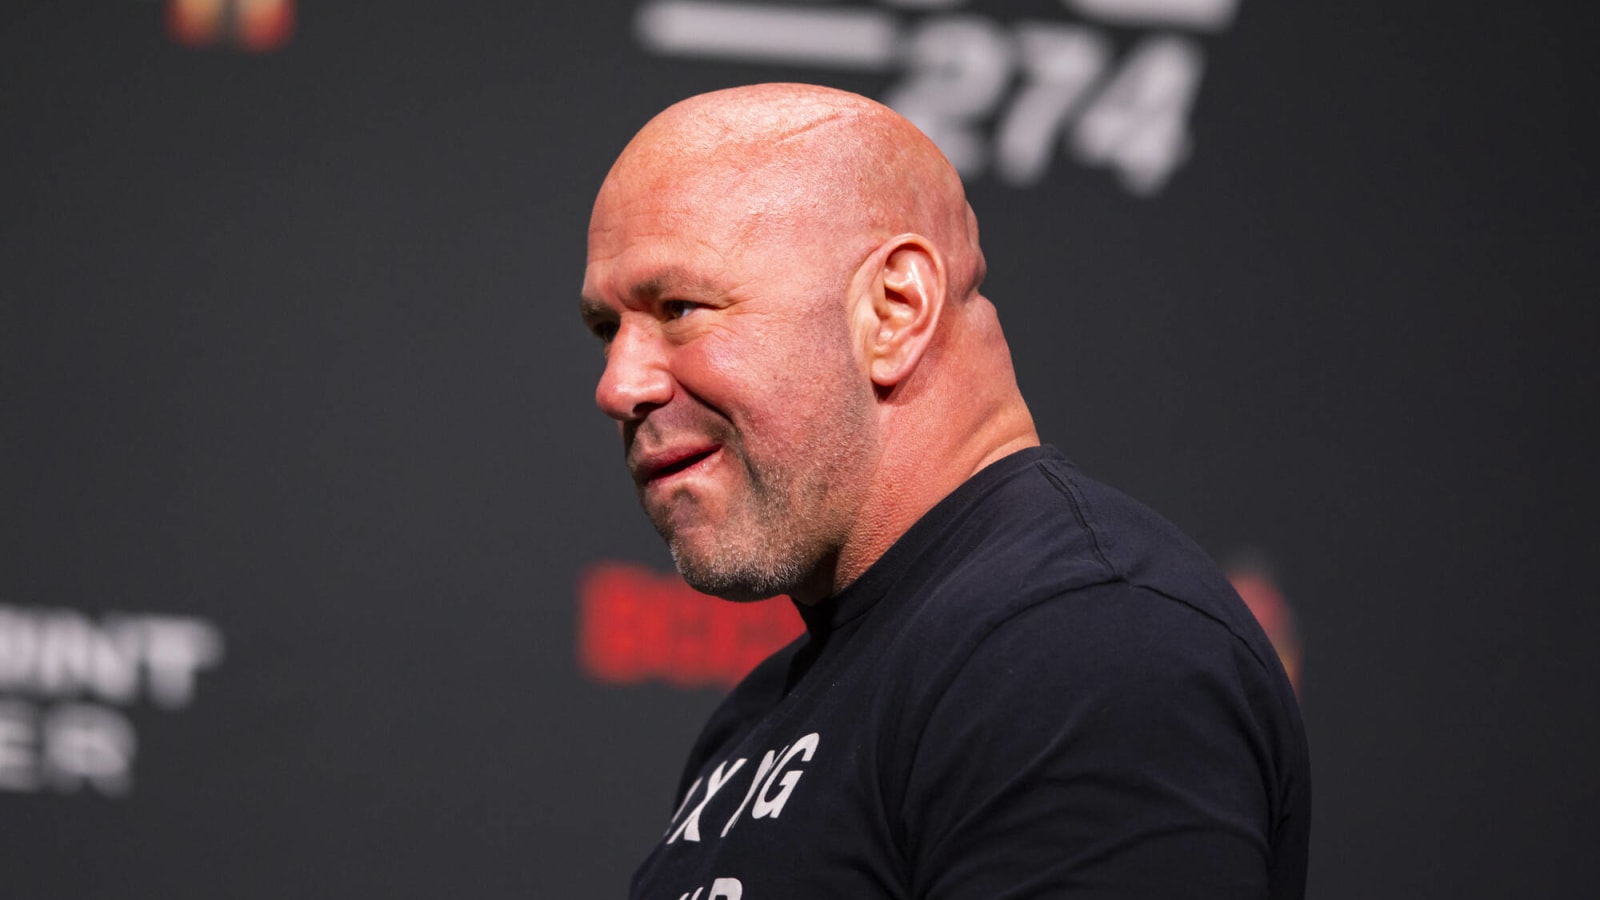 Dana White hints Santiago Bernabeu could be used to host UFC event